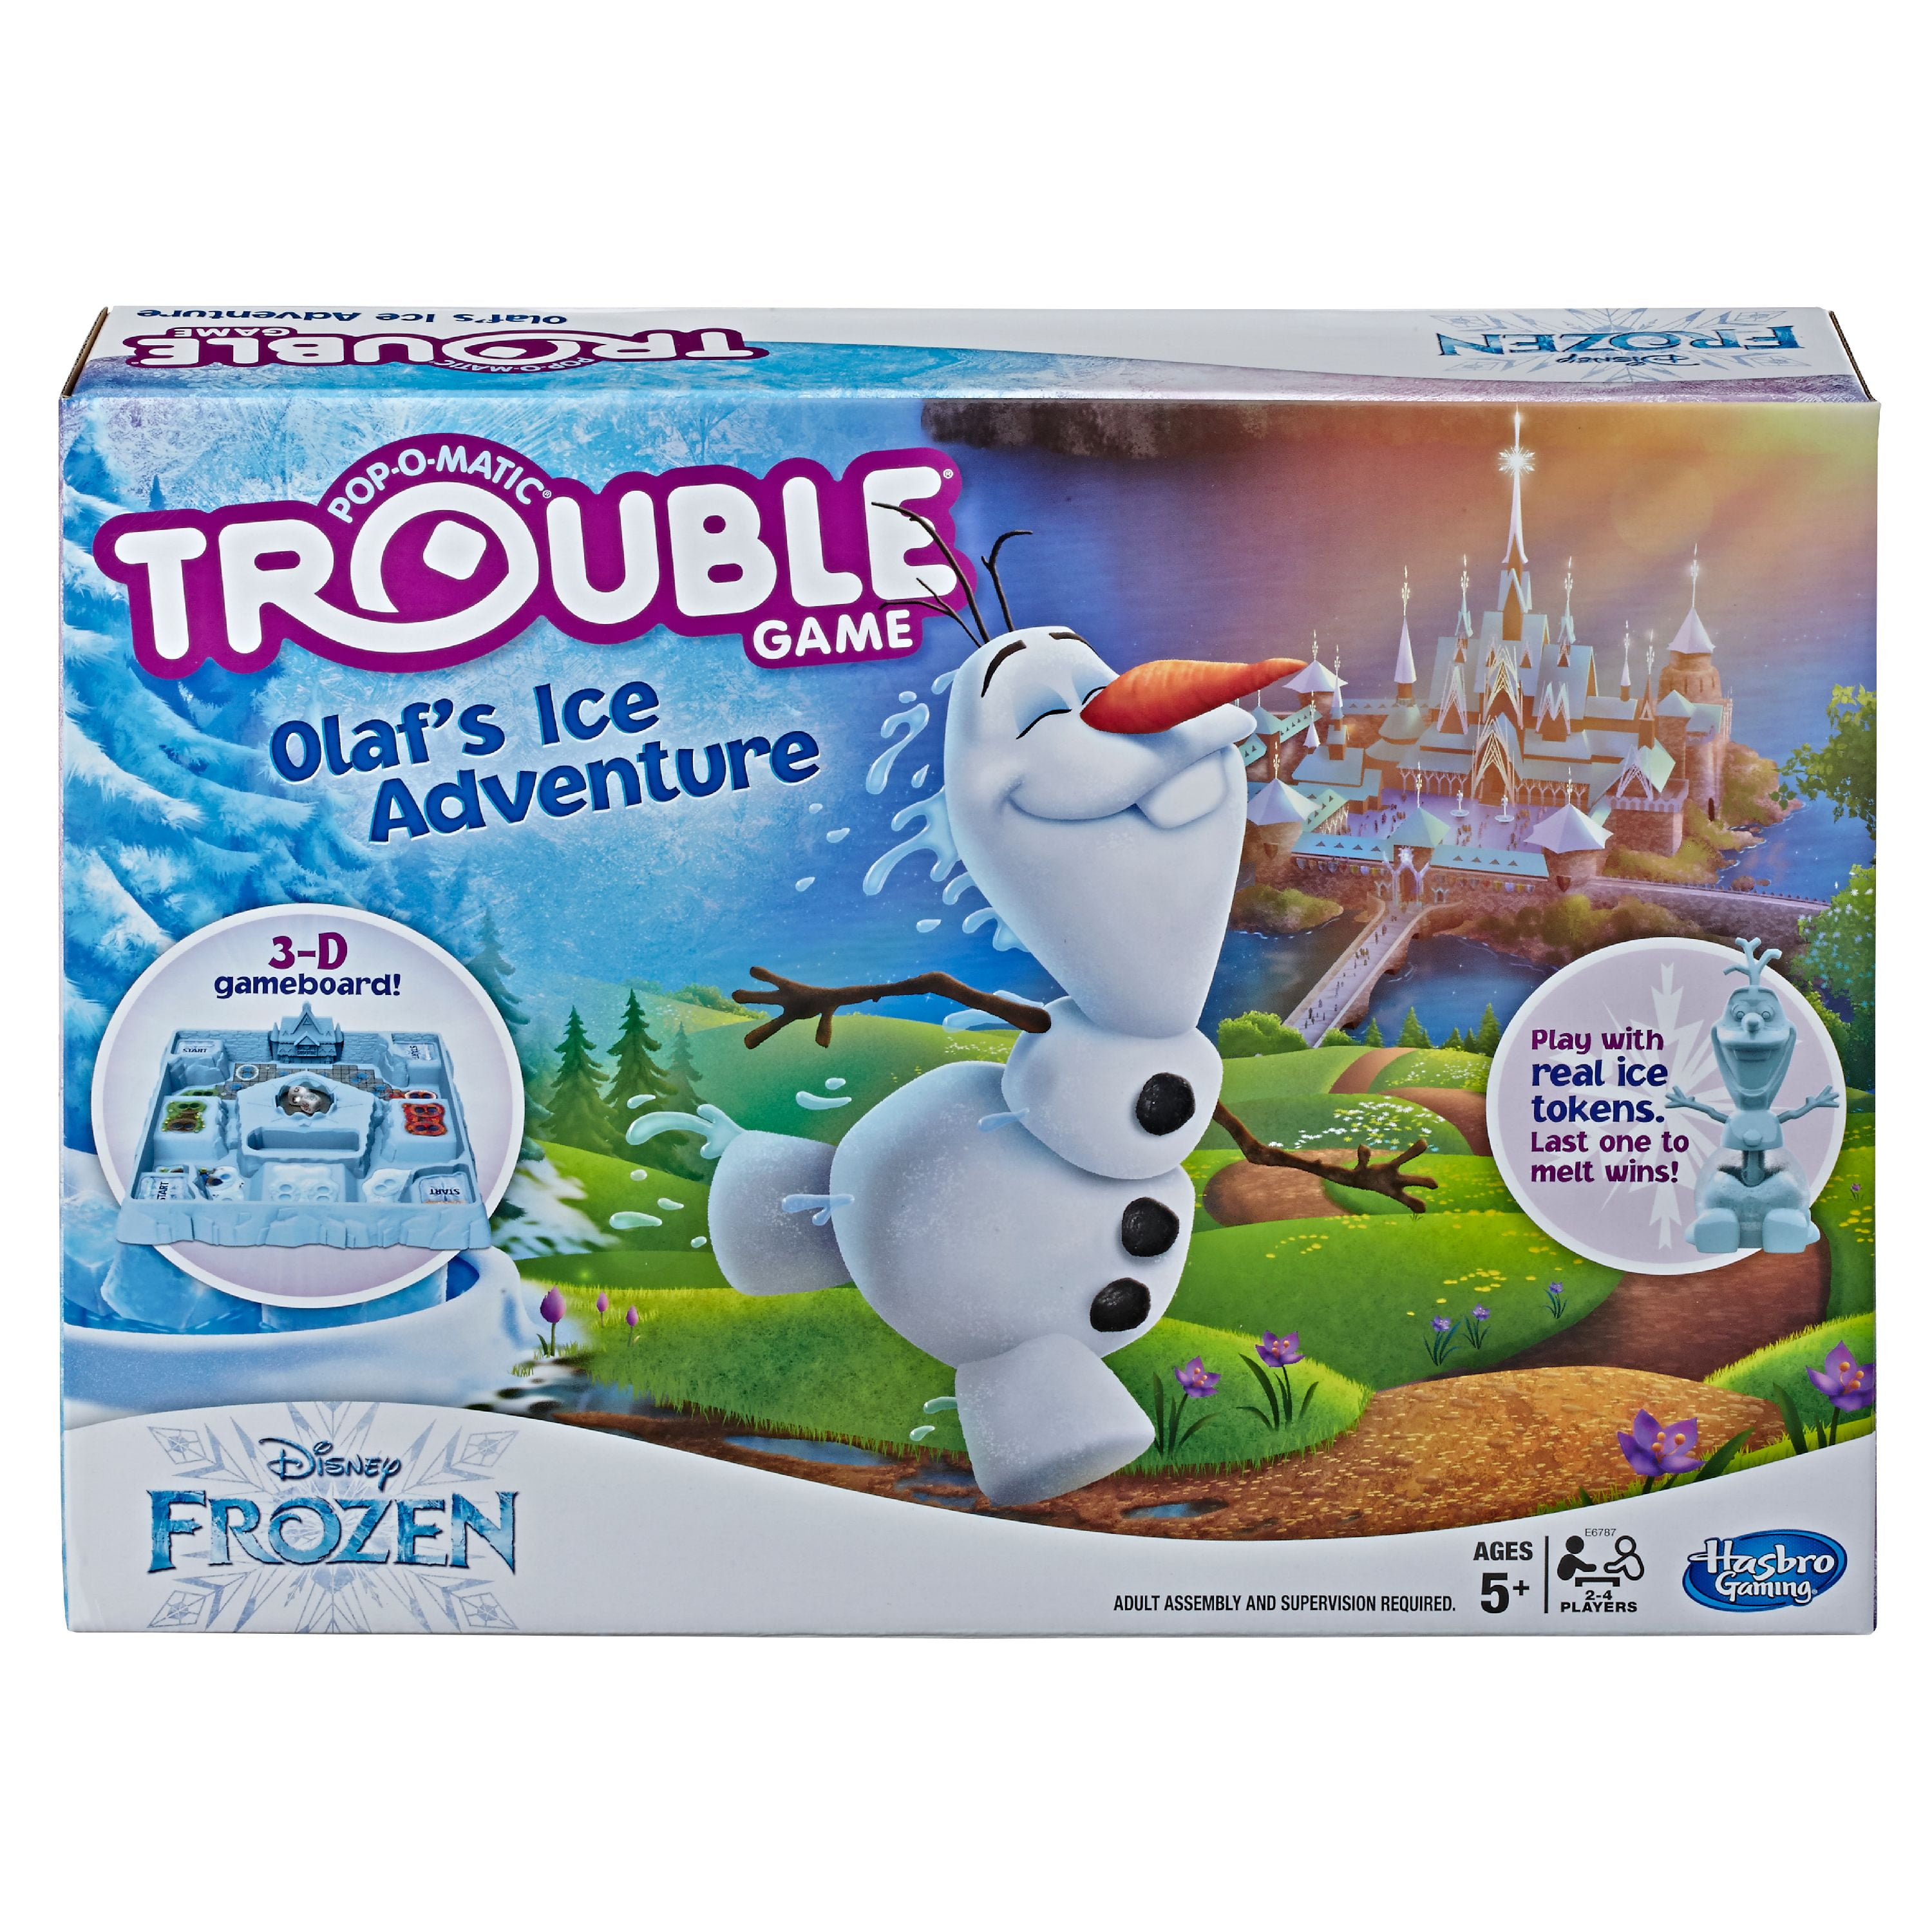 NEW SEALED Disney Frozen 2 Frosted Fishing Snowflake Board Game for Kids 